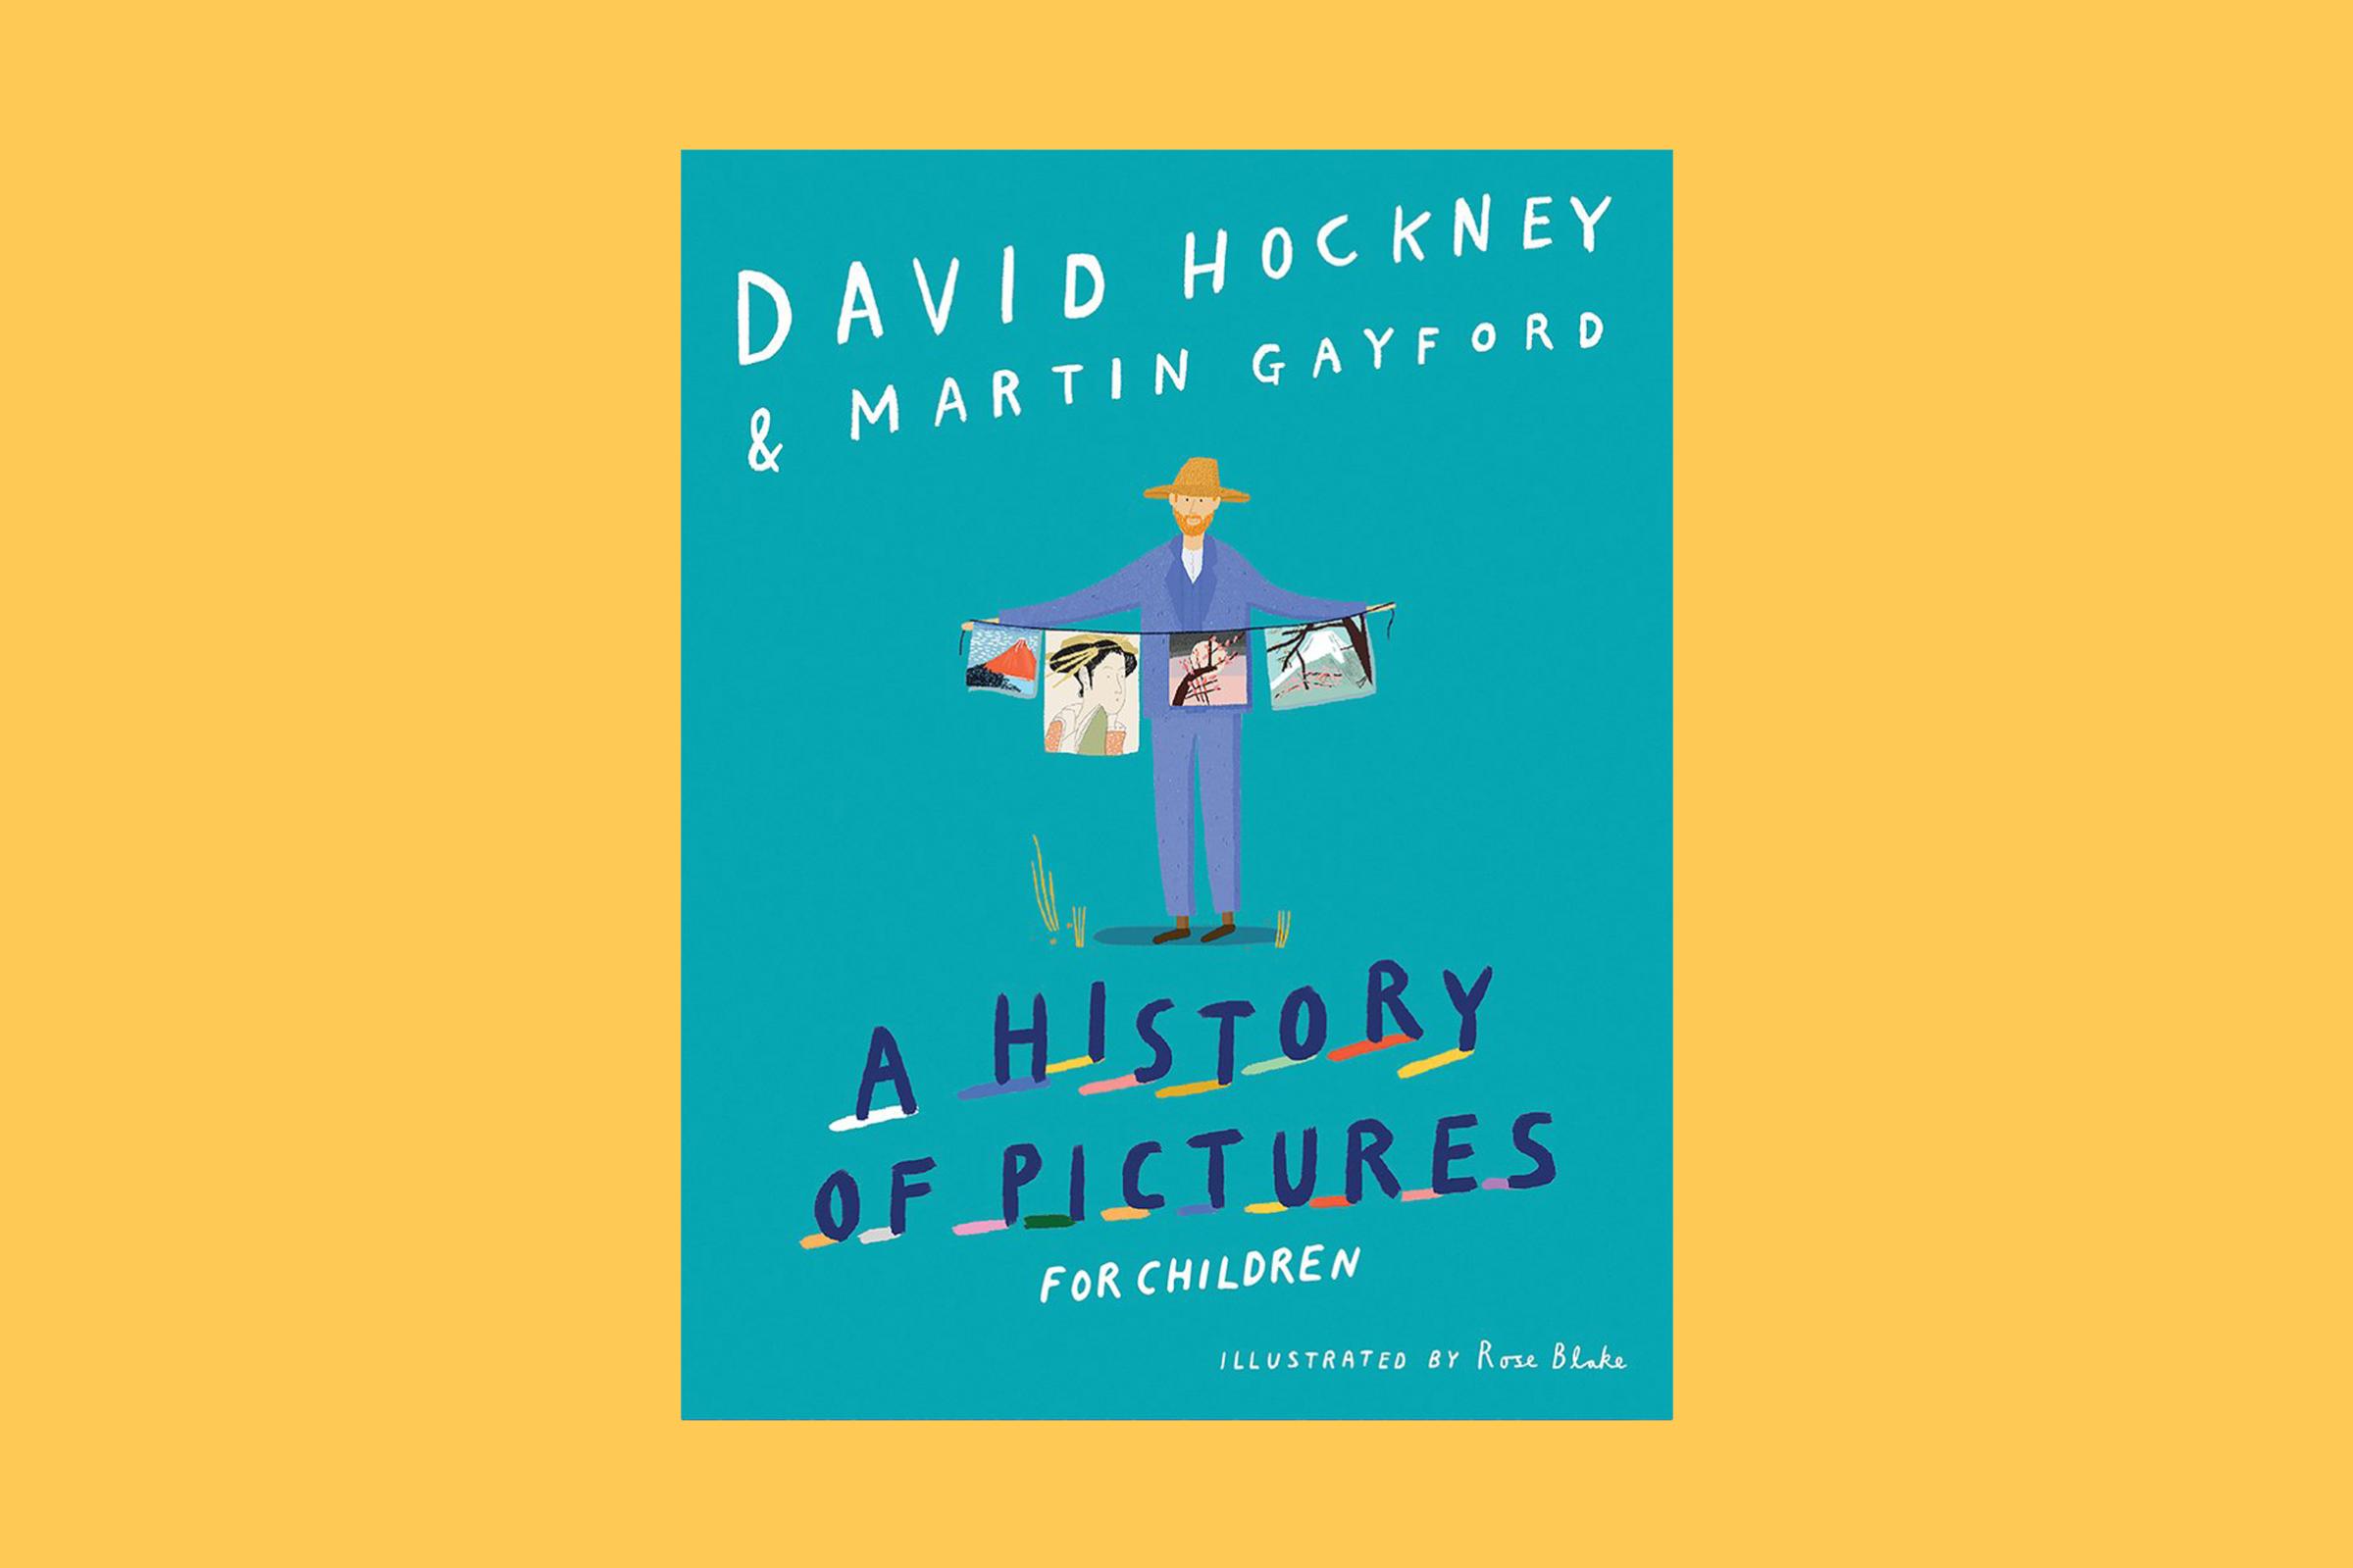 A History of Pictures for Children by David Hockney and Martin Gayford